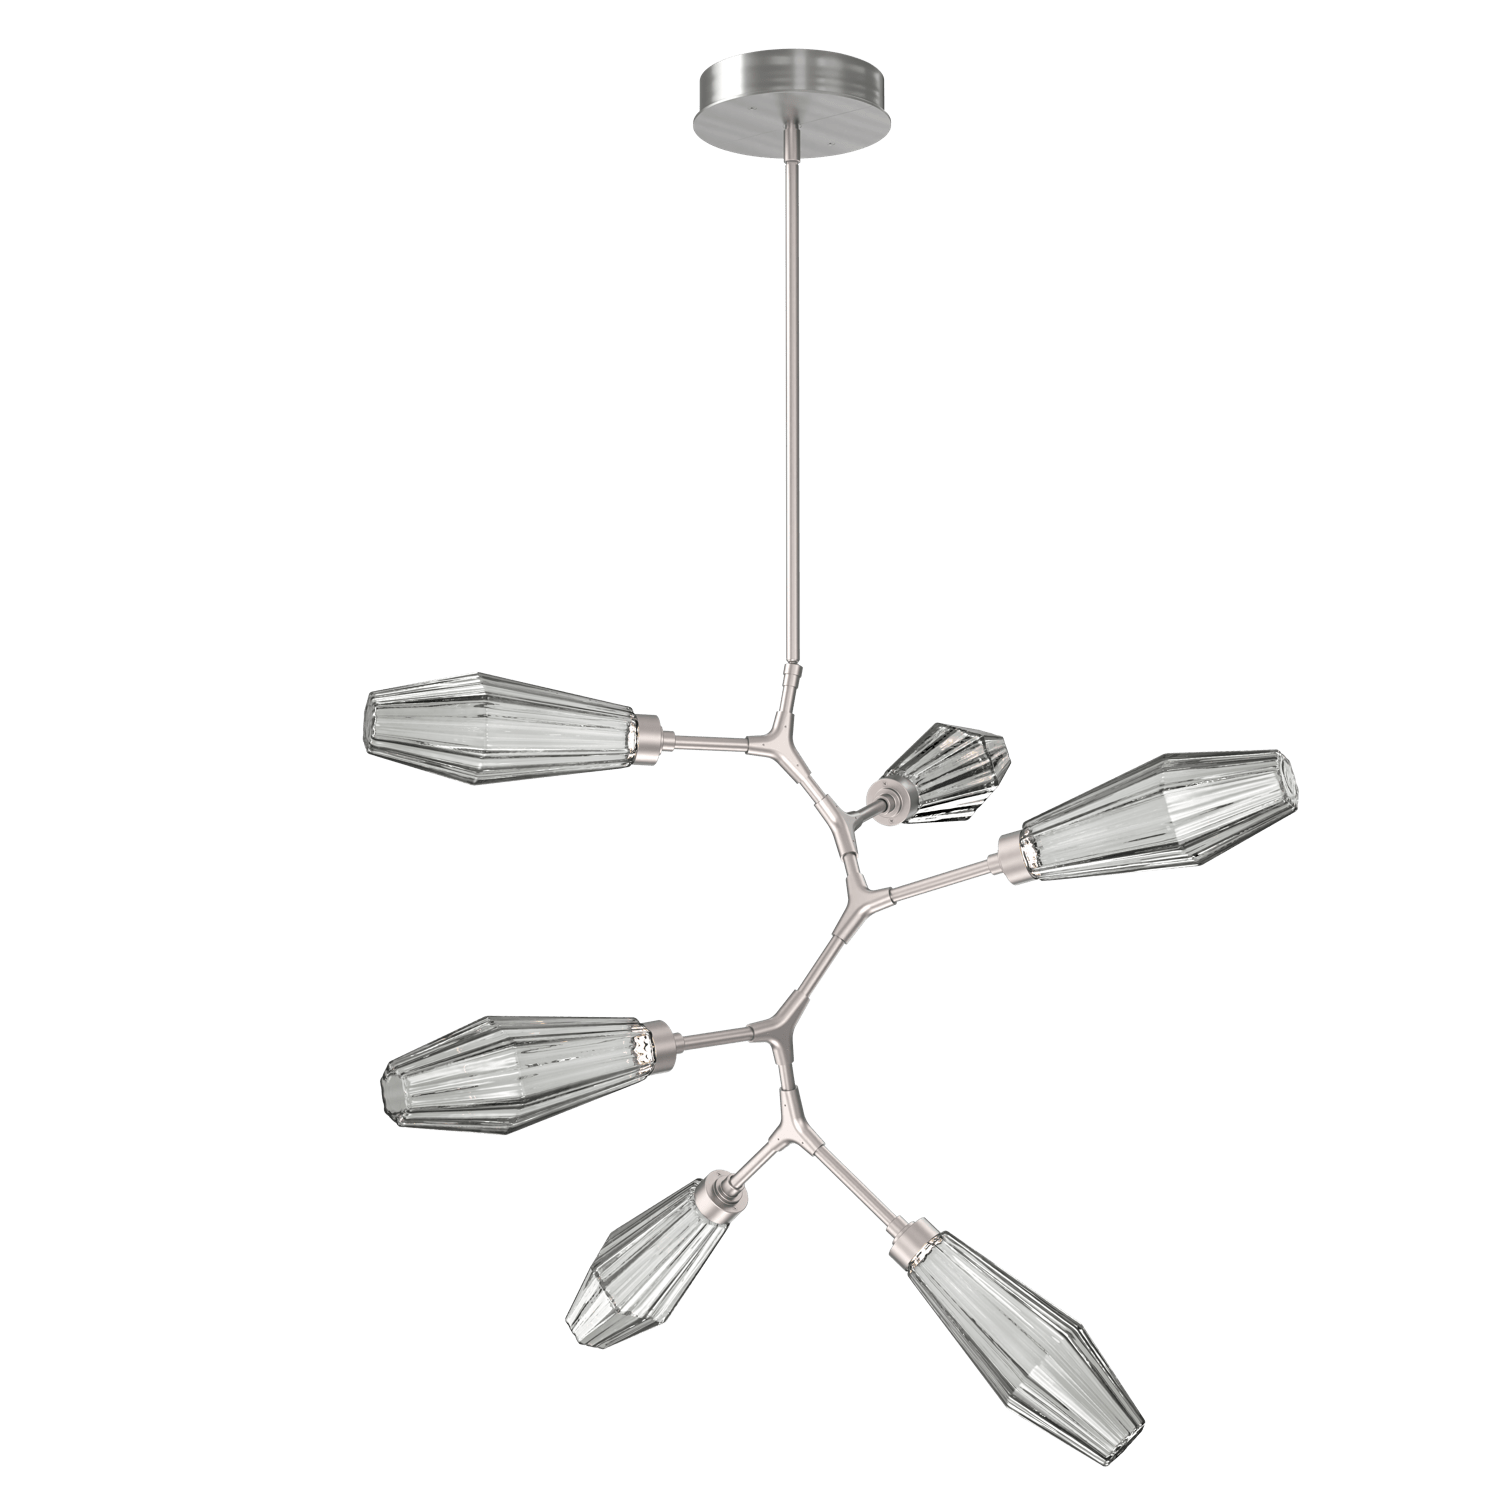 CHB0049-VA-SN-RS-Hammerton-Studio-Aalto-6-light-modern-vine-chandelier-with-satin-nickel-finish-and-optic-ribbed-smoke-glass-shades-and-LED-lamping